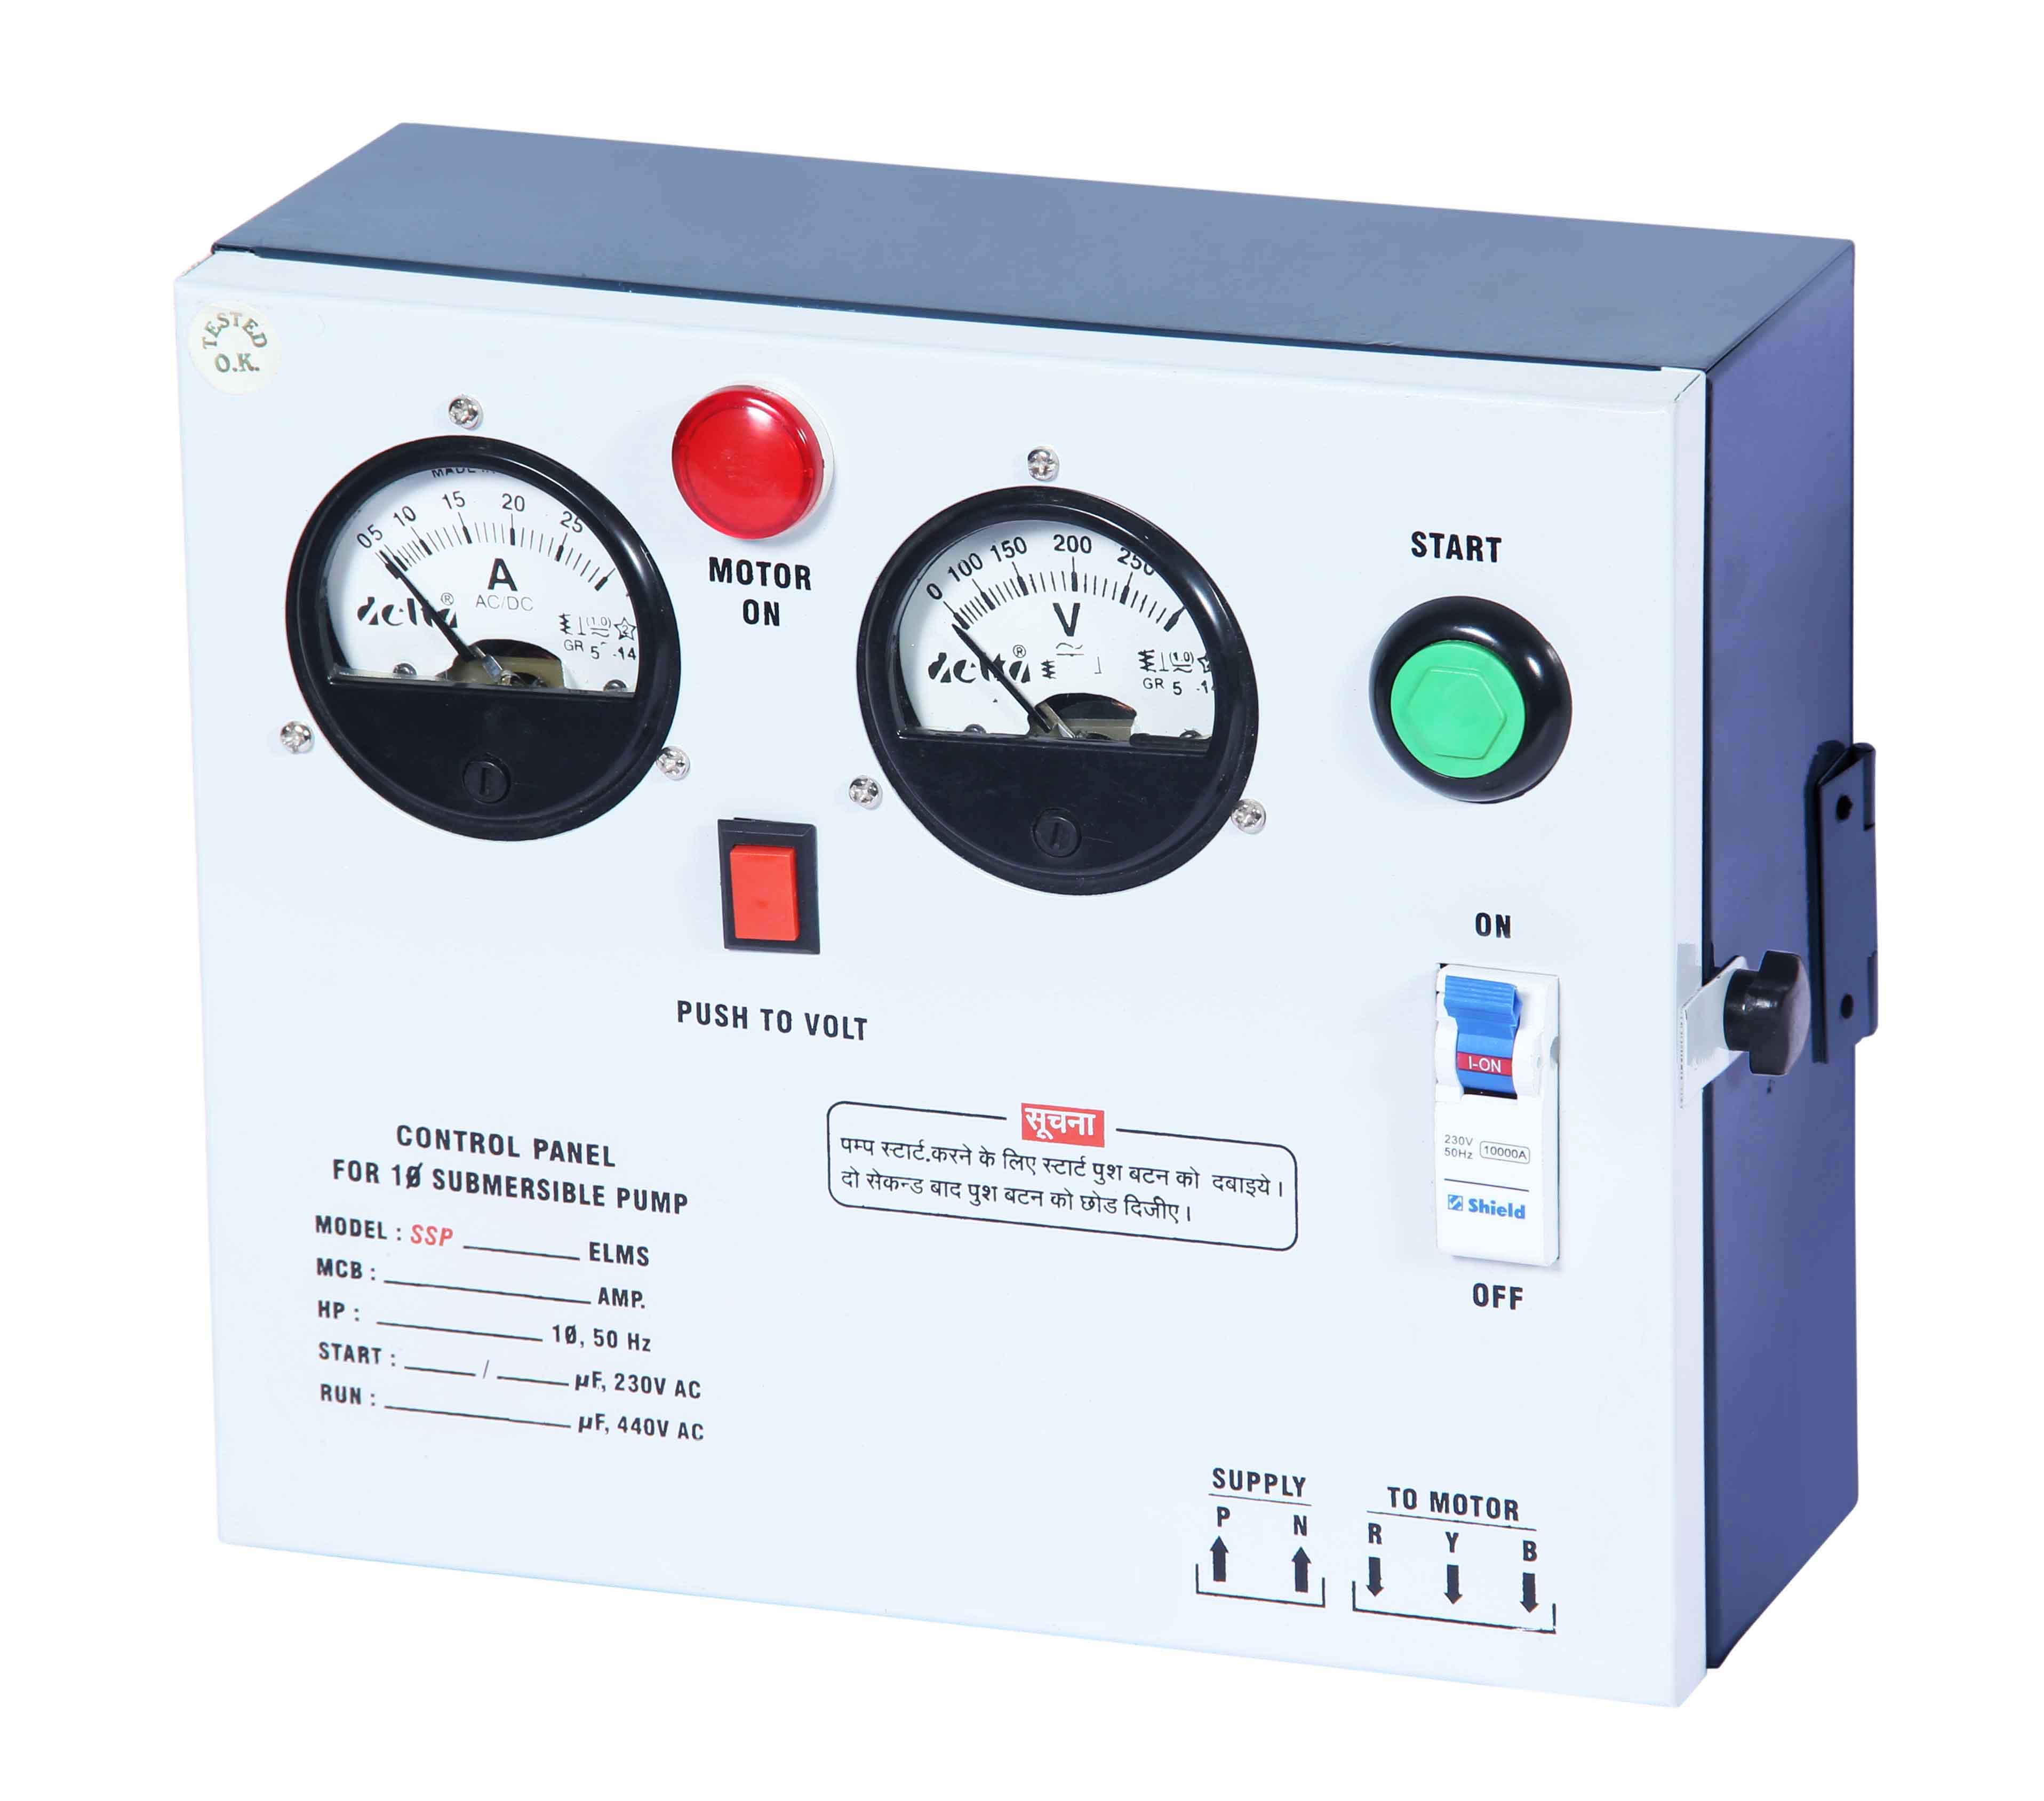 ELMS Single phase motor starter suitable for 2 HP submersible motor with overload protections by MCB